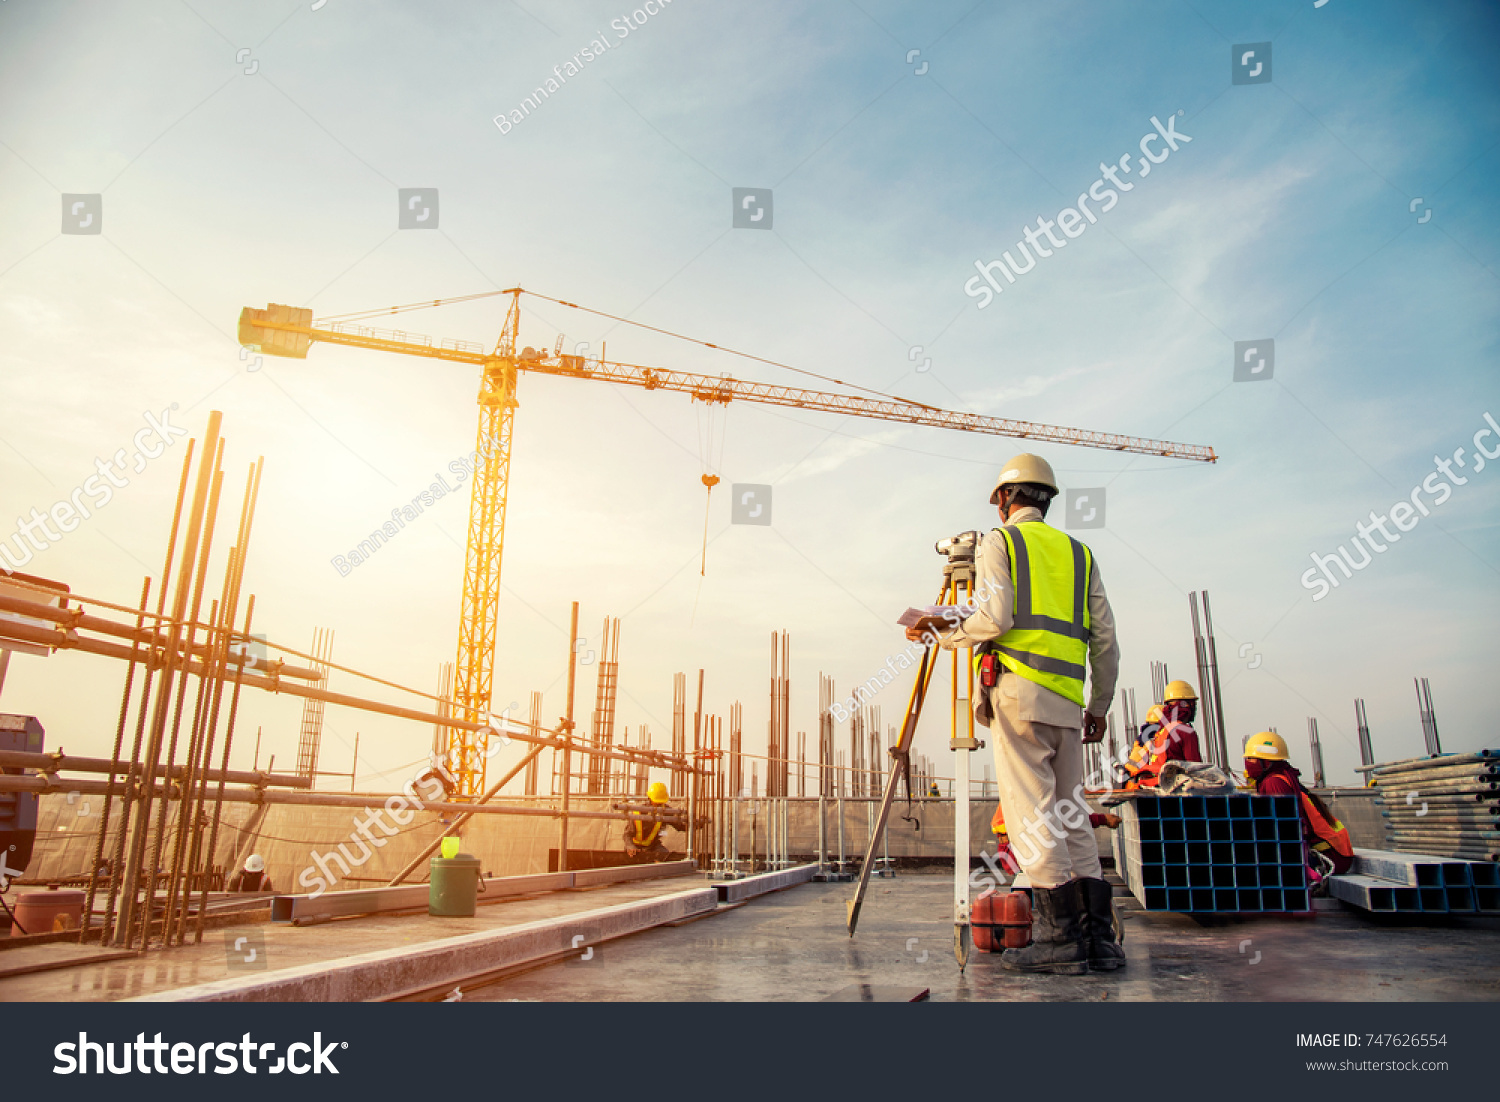 Surveyor builder Engineer with theodolite transit equipment at construction site outdoors during surveying work